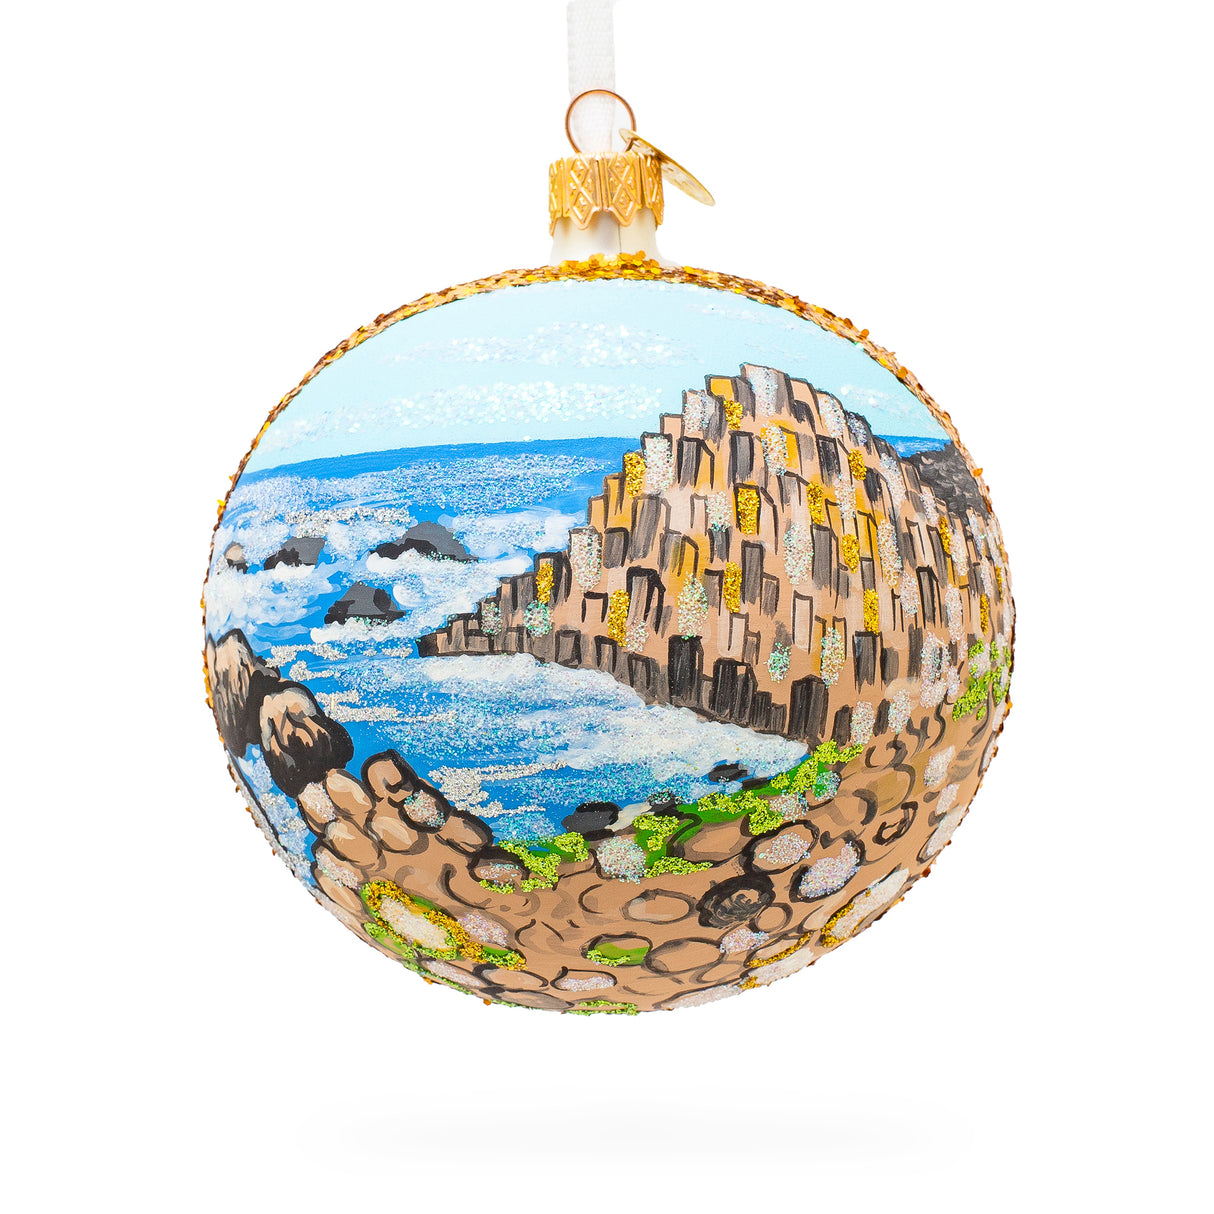 Giant's Causeway, Northern Ireland, United Kingdom Glass Ball Christmas Ornament 4 Inches in Multi color, Round shape